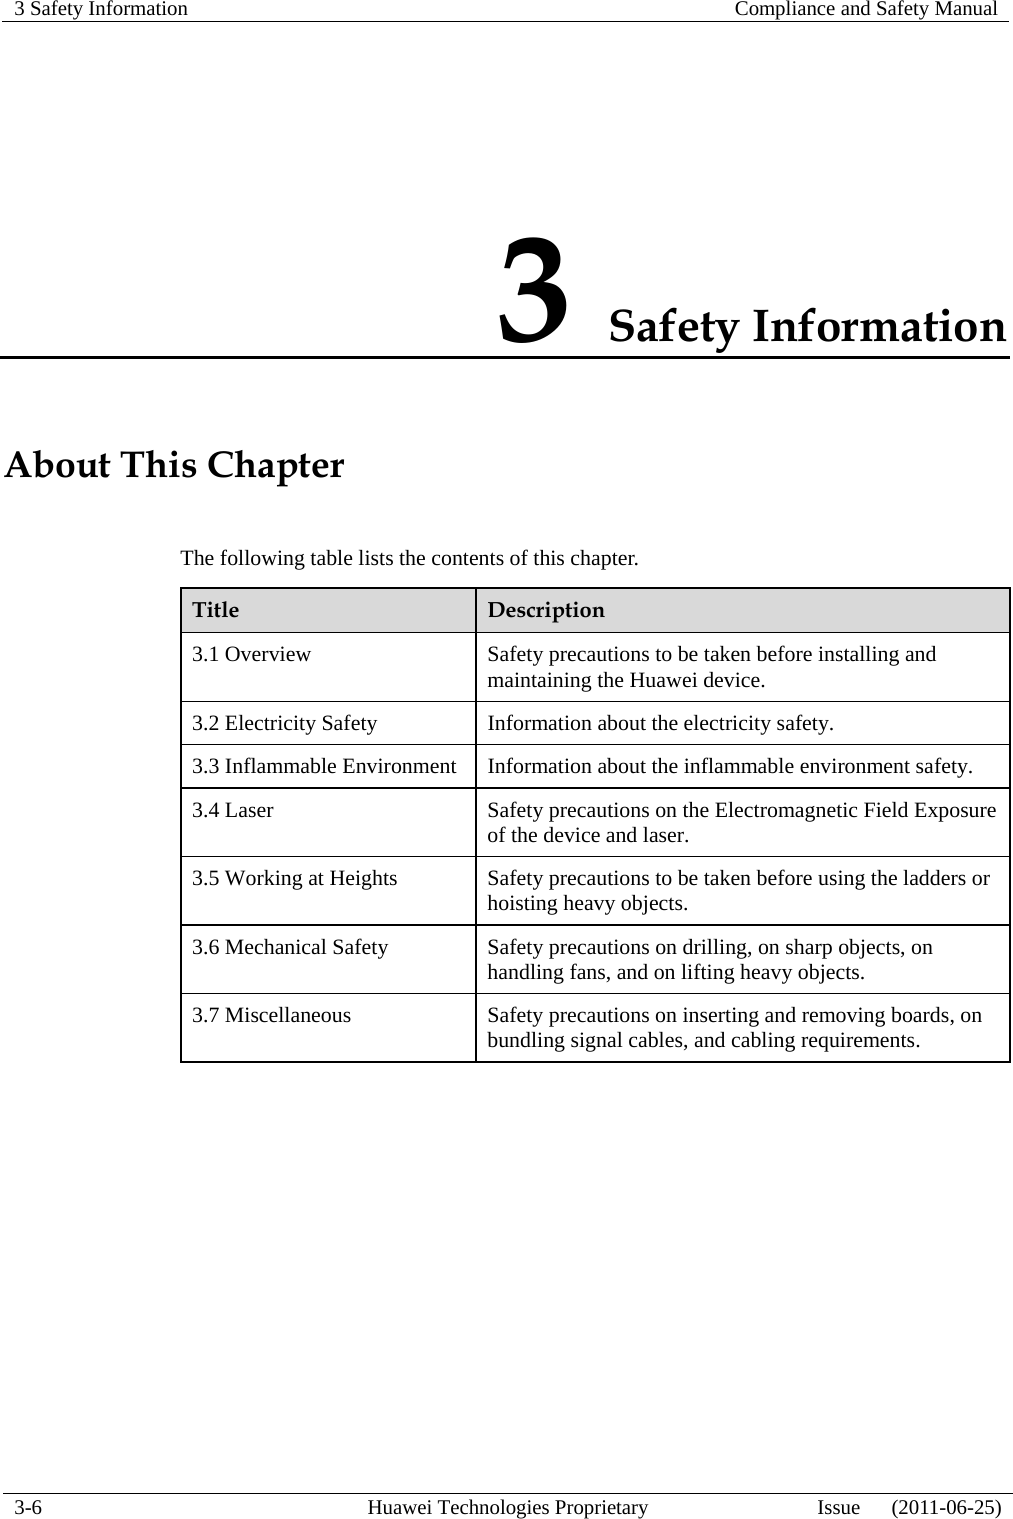 3 Safety Information   Compliance and Safety Manual  3-6  Huawei Technologies Proprietary  Issue      (2011-06-25) 3 Safety Information About This Chapter The following table lists the contents of this chapter. Title  Description 3.1 Overview  Safety precautions to be taken before installing and maintaining the Huawei device. 3.2 Electricity Safety  Information about the electricity safety. 3.3 Inflammable Environment  Information about the inflammable environment safety. 3.4 Laser  Safety precautions on the Electromagnetic Field Exposure of the device and laser. 3.5 Working at Heights  Safety precautions to be taken before using the ladders or hoisting heavy objects. 3.6 Mechanical Safety  Safety precautions on drilling, on sharp objects, on handling fans, and on lifting heavy objects. 3.7 Miscellaneous  Safety precautions on inserting and removing boards, on bundling signal cables, and cabling requirements.  